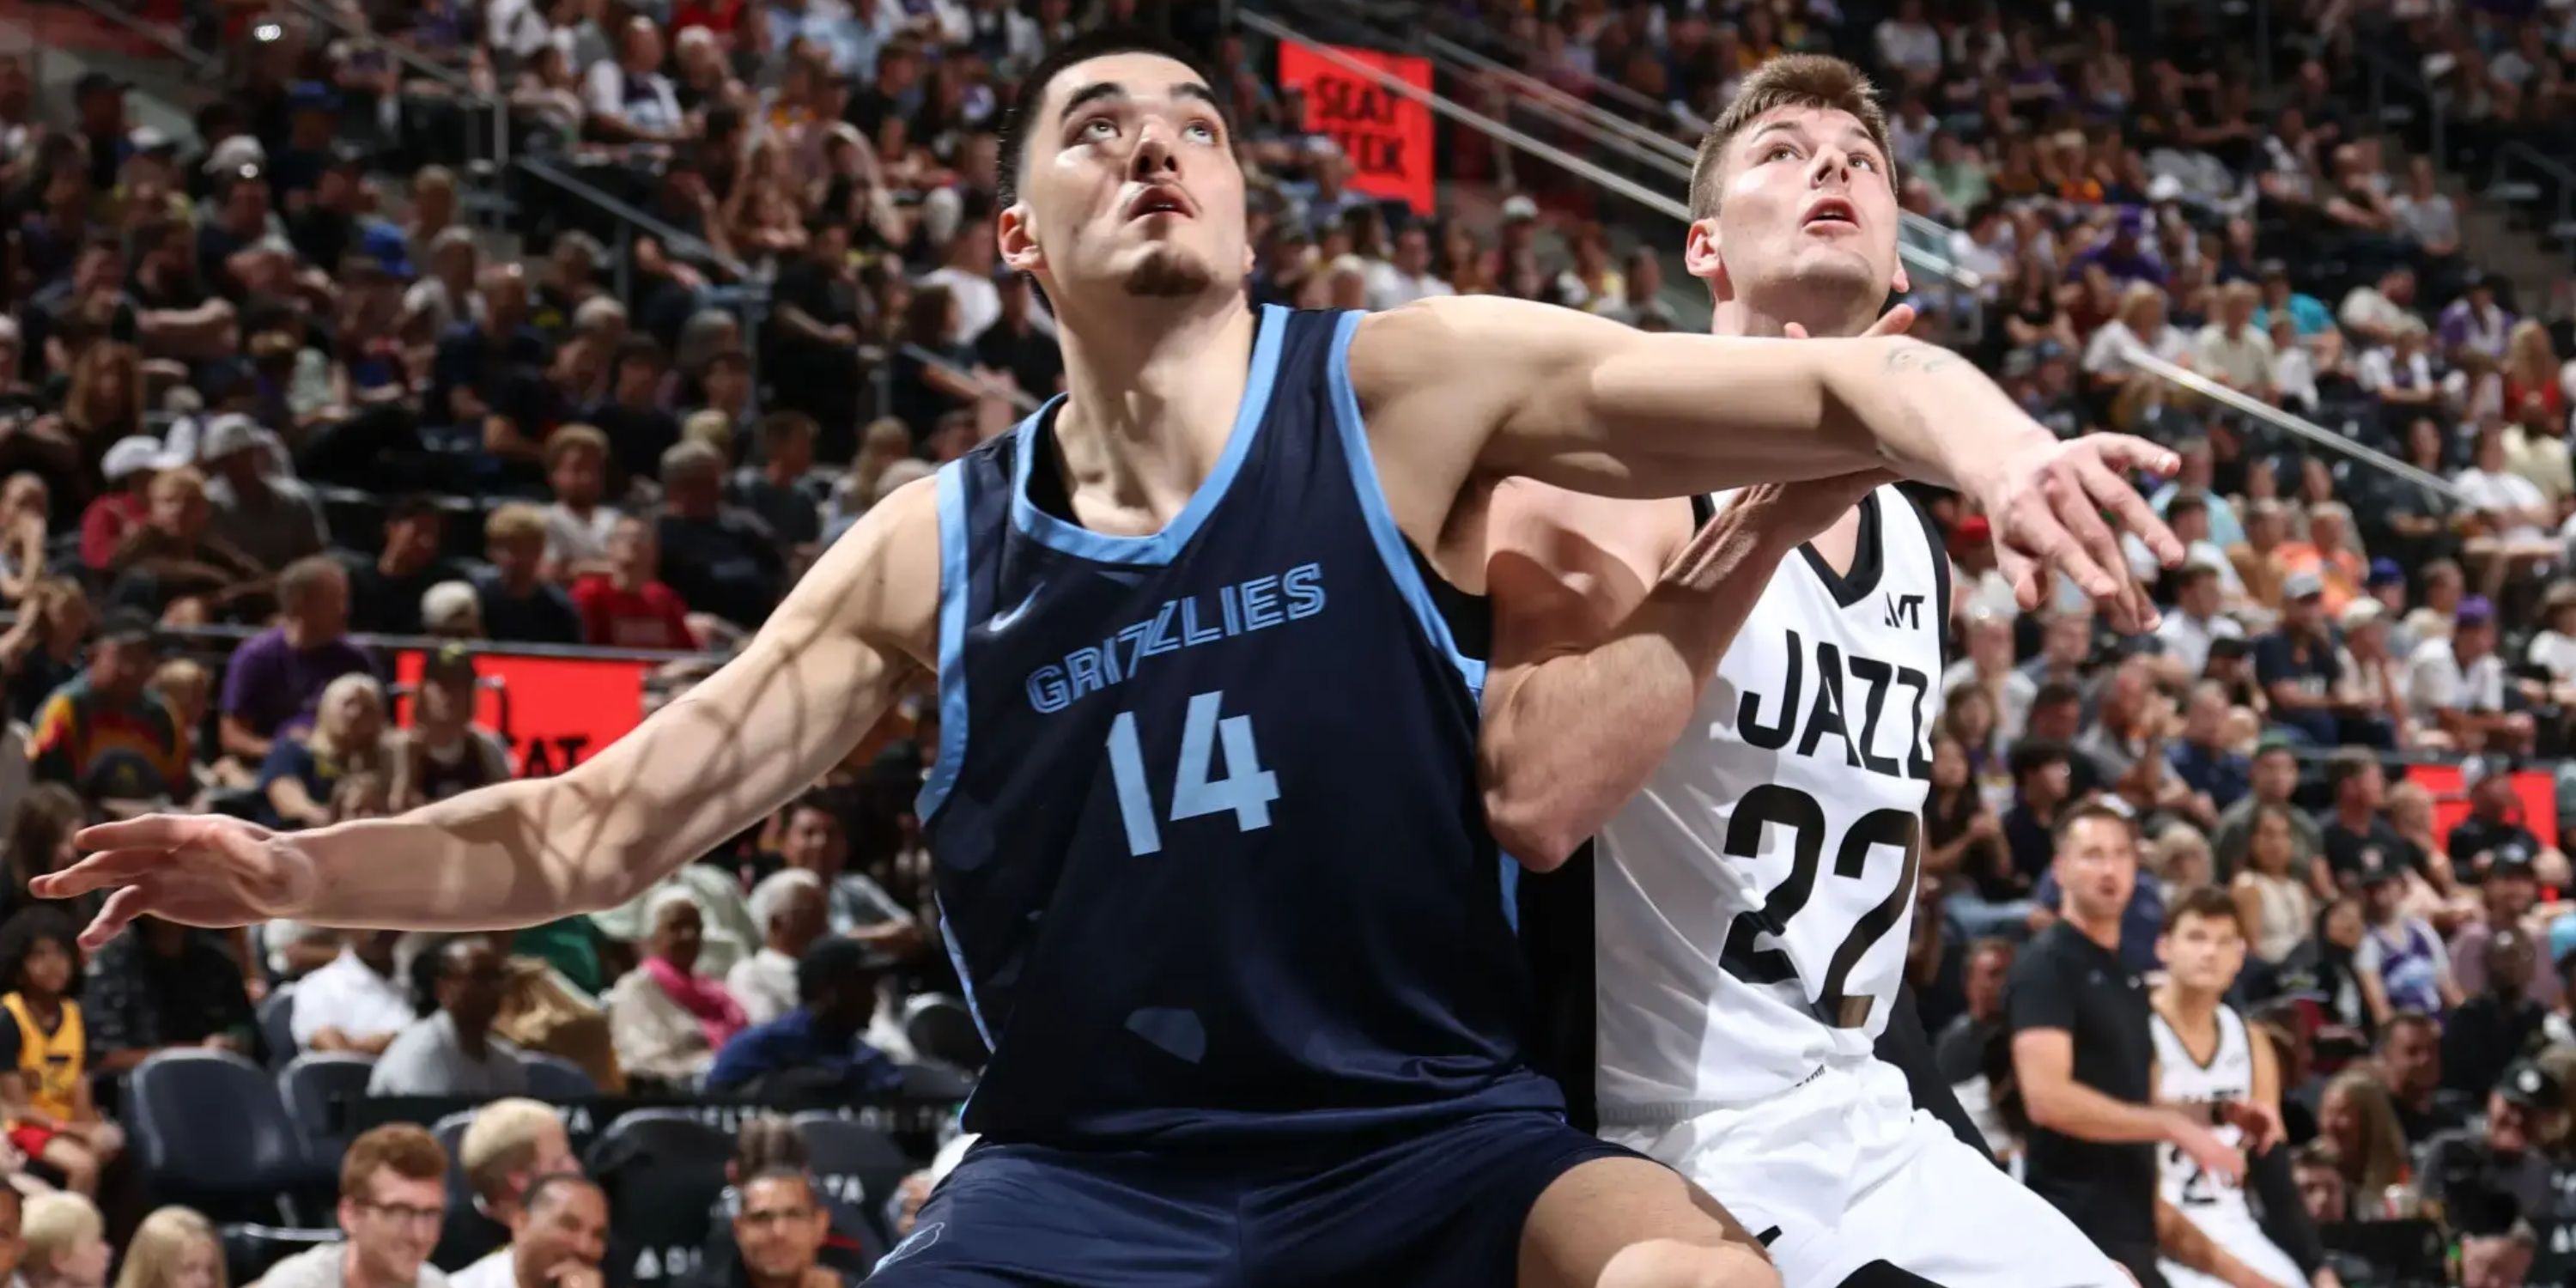 Zach Edey of the Grizzlies played strongly in the NBA Summer League despite limited playing time